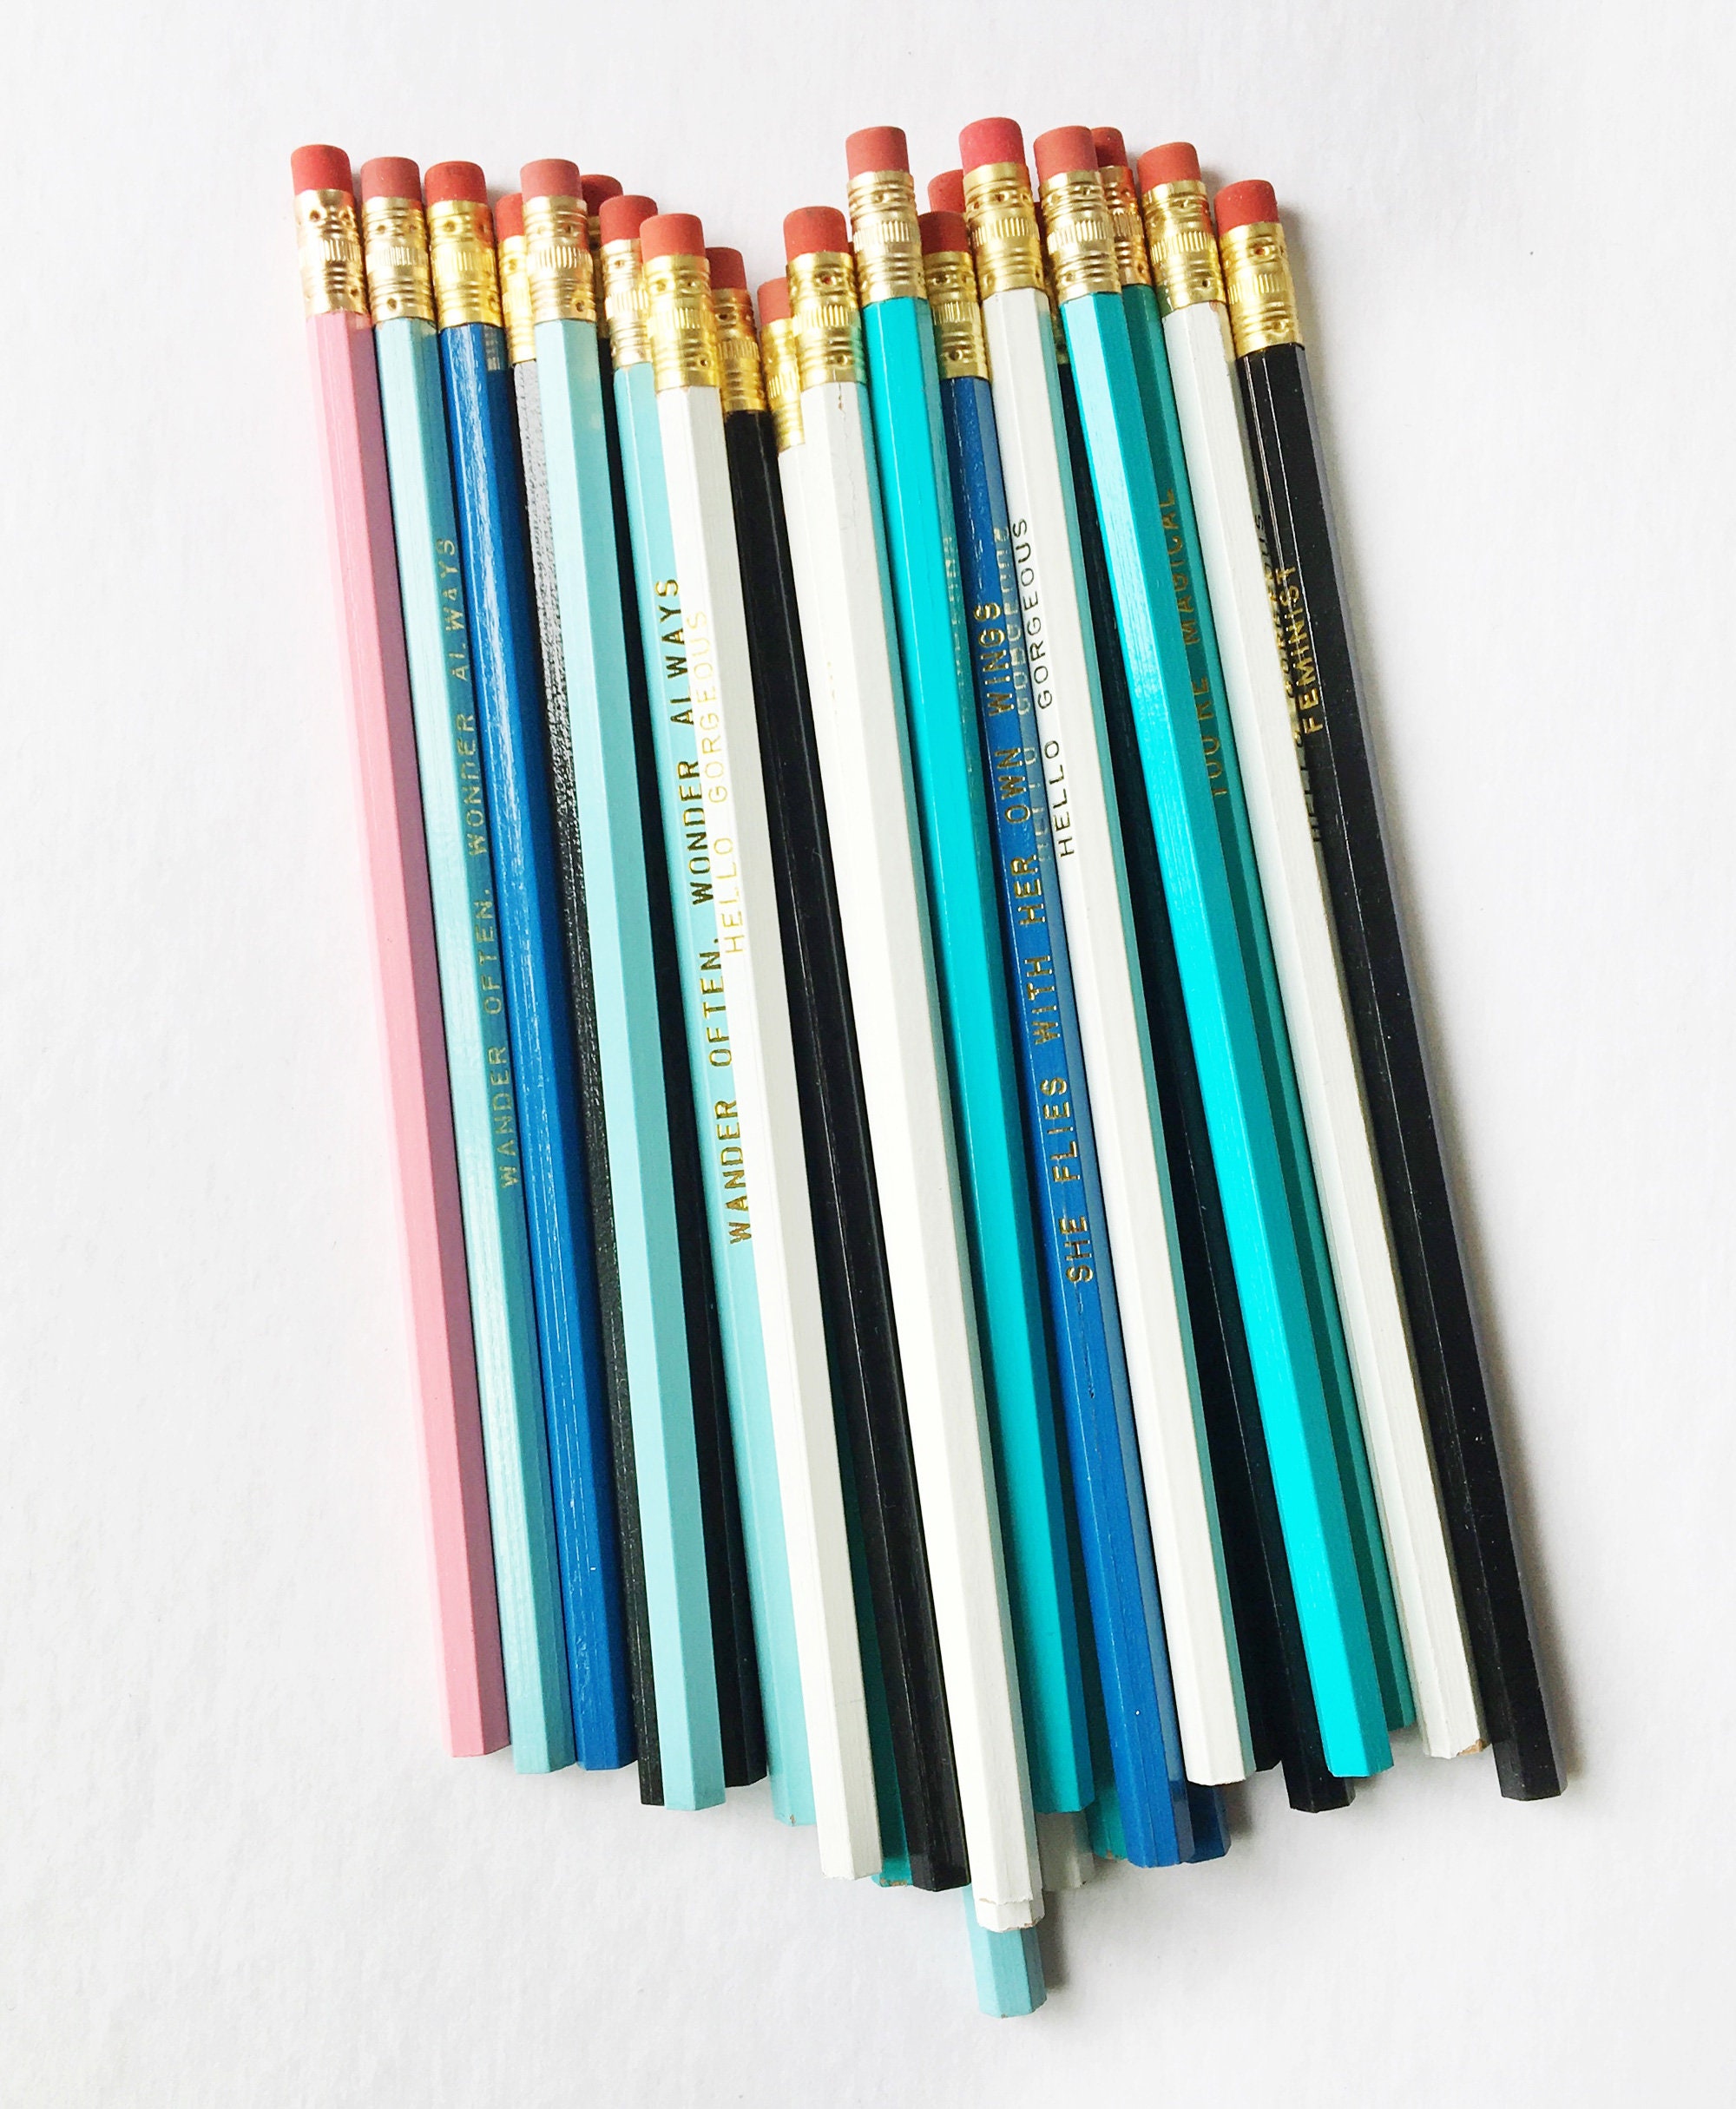 Personalized White Pencils with Gold Foil Hearts - 24 Pc